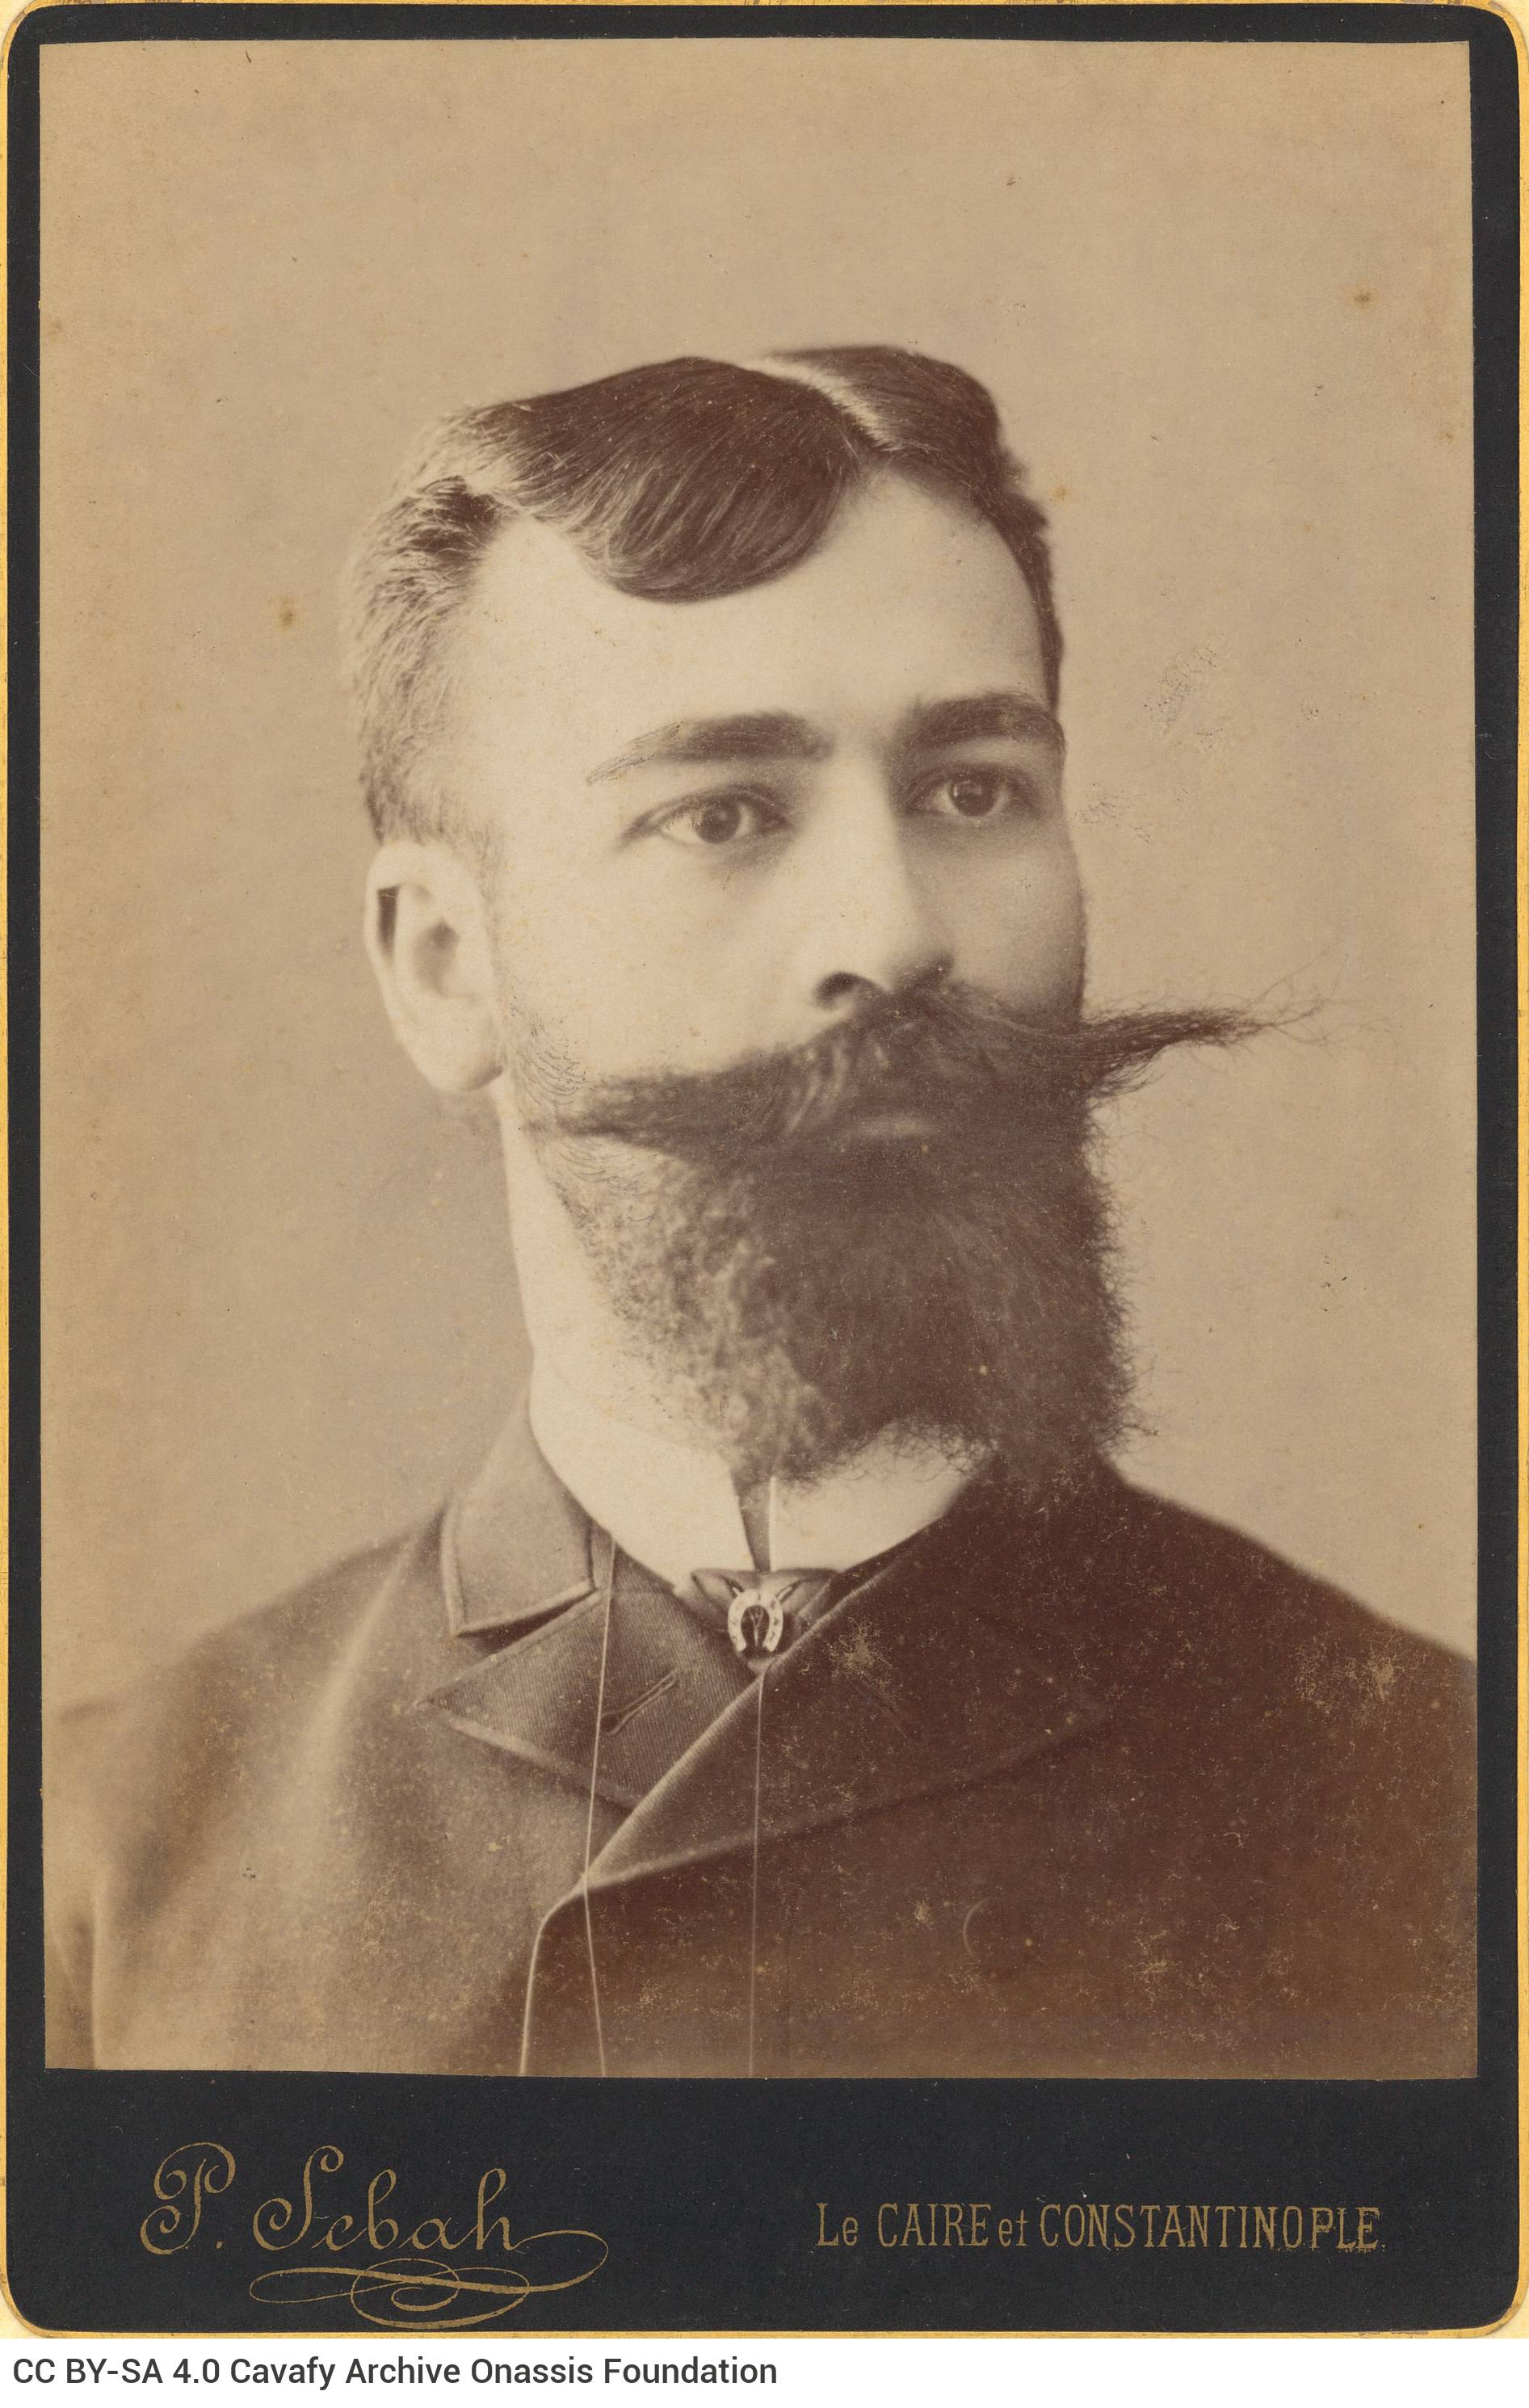 Photographic portrait of a young man with a large moustache and a beard. The photo shop's logo in the lower part of the recto